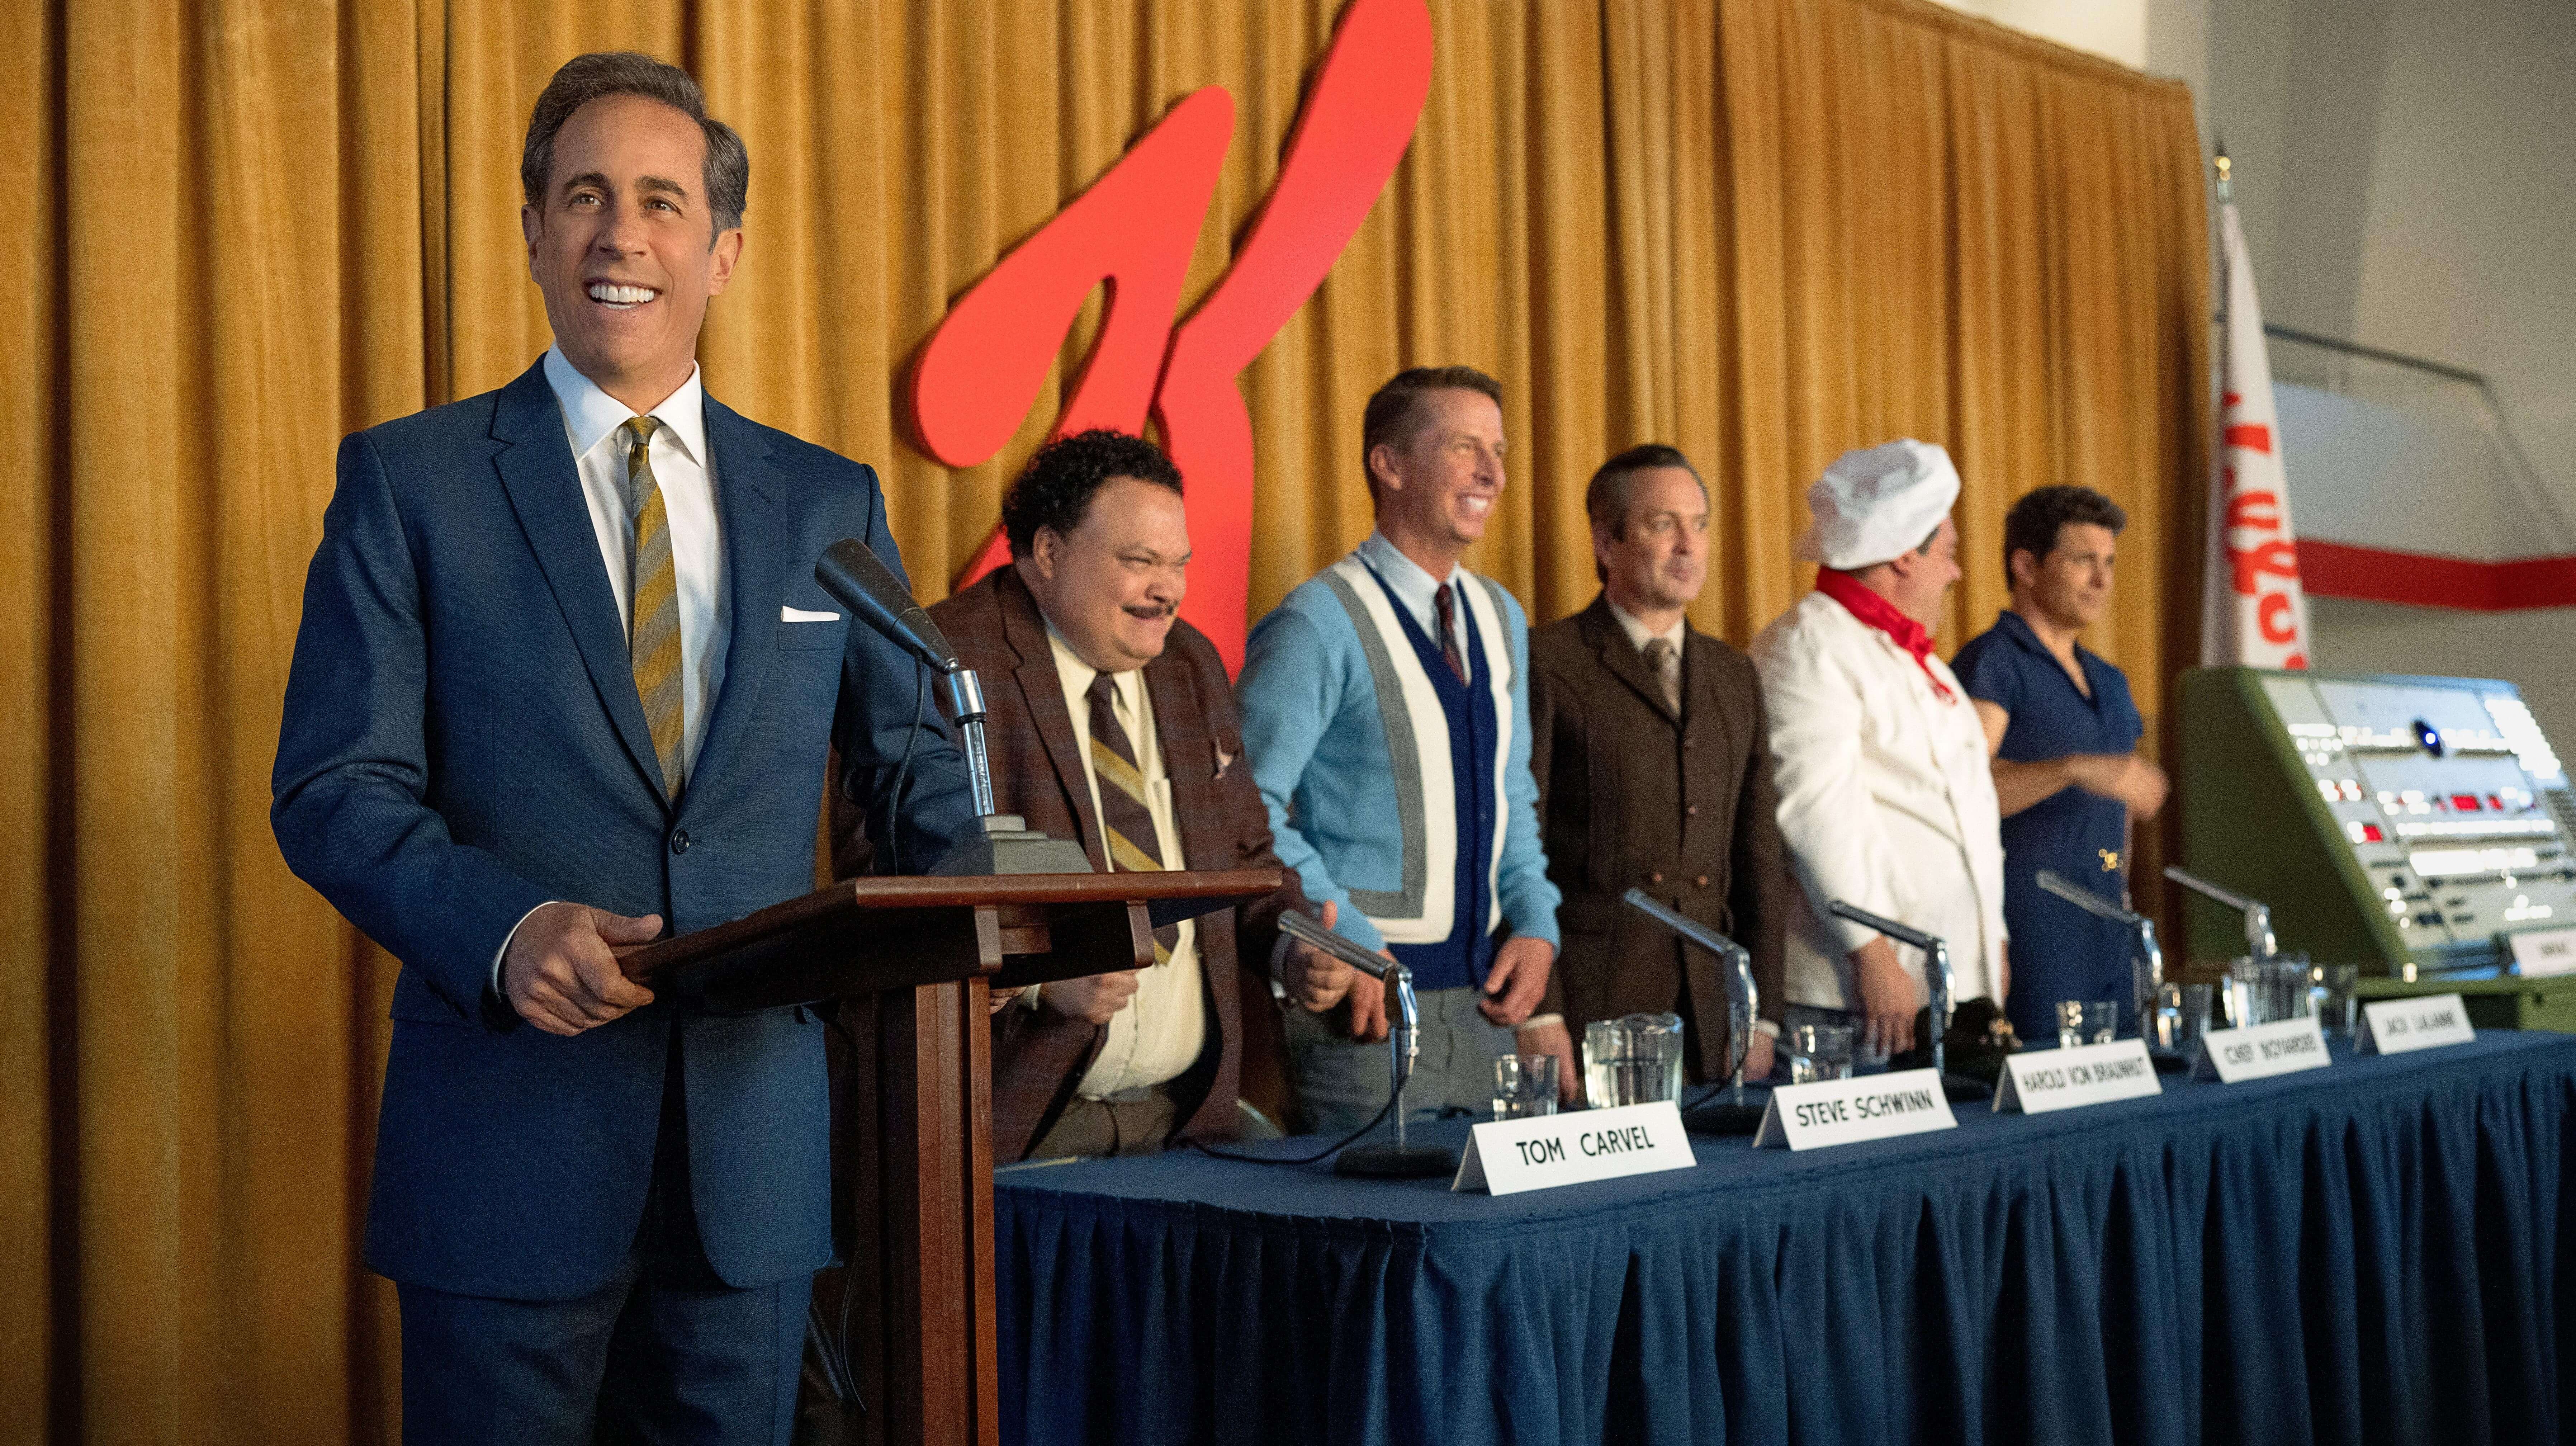 Jerry Seinfeld’s Unfrosted is as goofy as you’d expect in new trailer